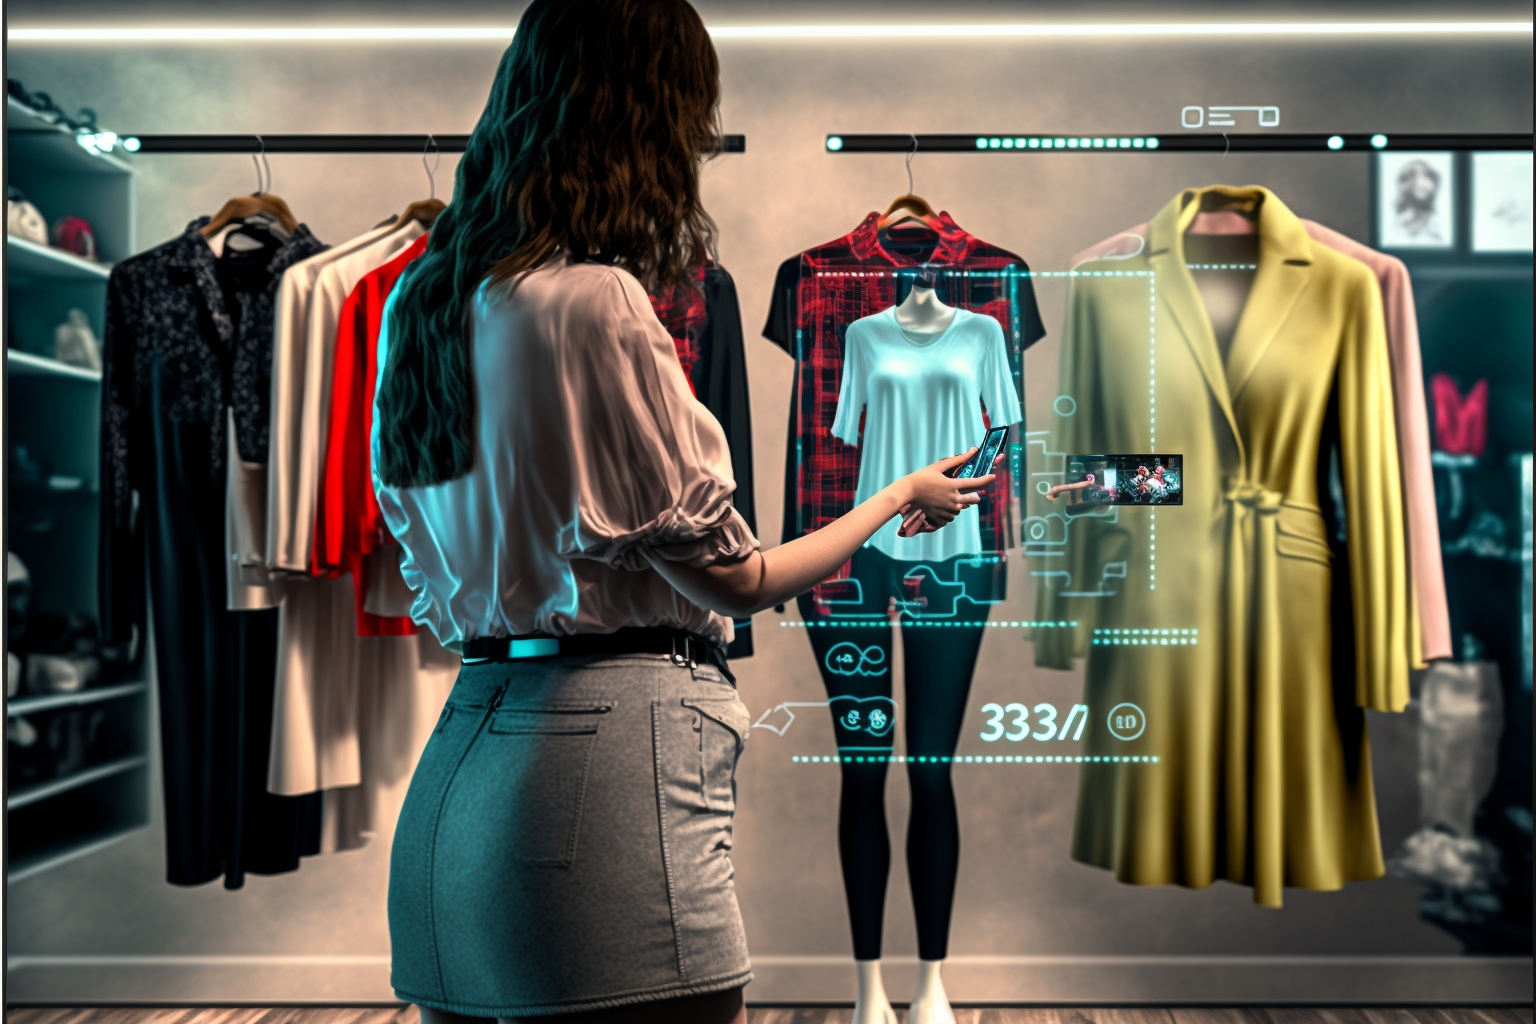 Harness the power of social media to anticipate fashion trends